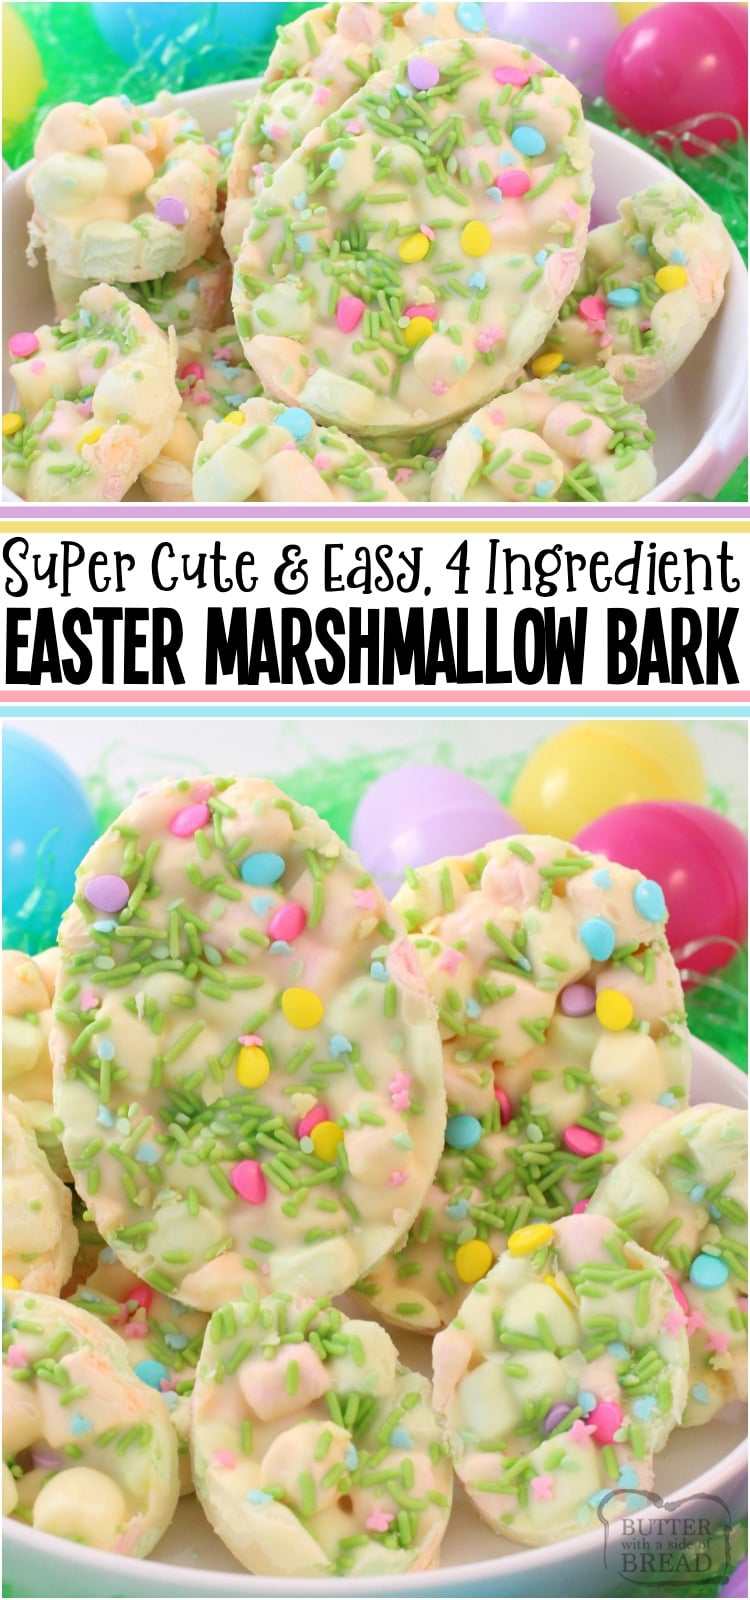 Easter Marshmallow Bark is one of my favorite Easter desserts! Just 4 ingredients and a few minutes to make this cute and festive Easter treat. Everyone enjoys our Easter Marshmallow Bark!